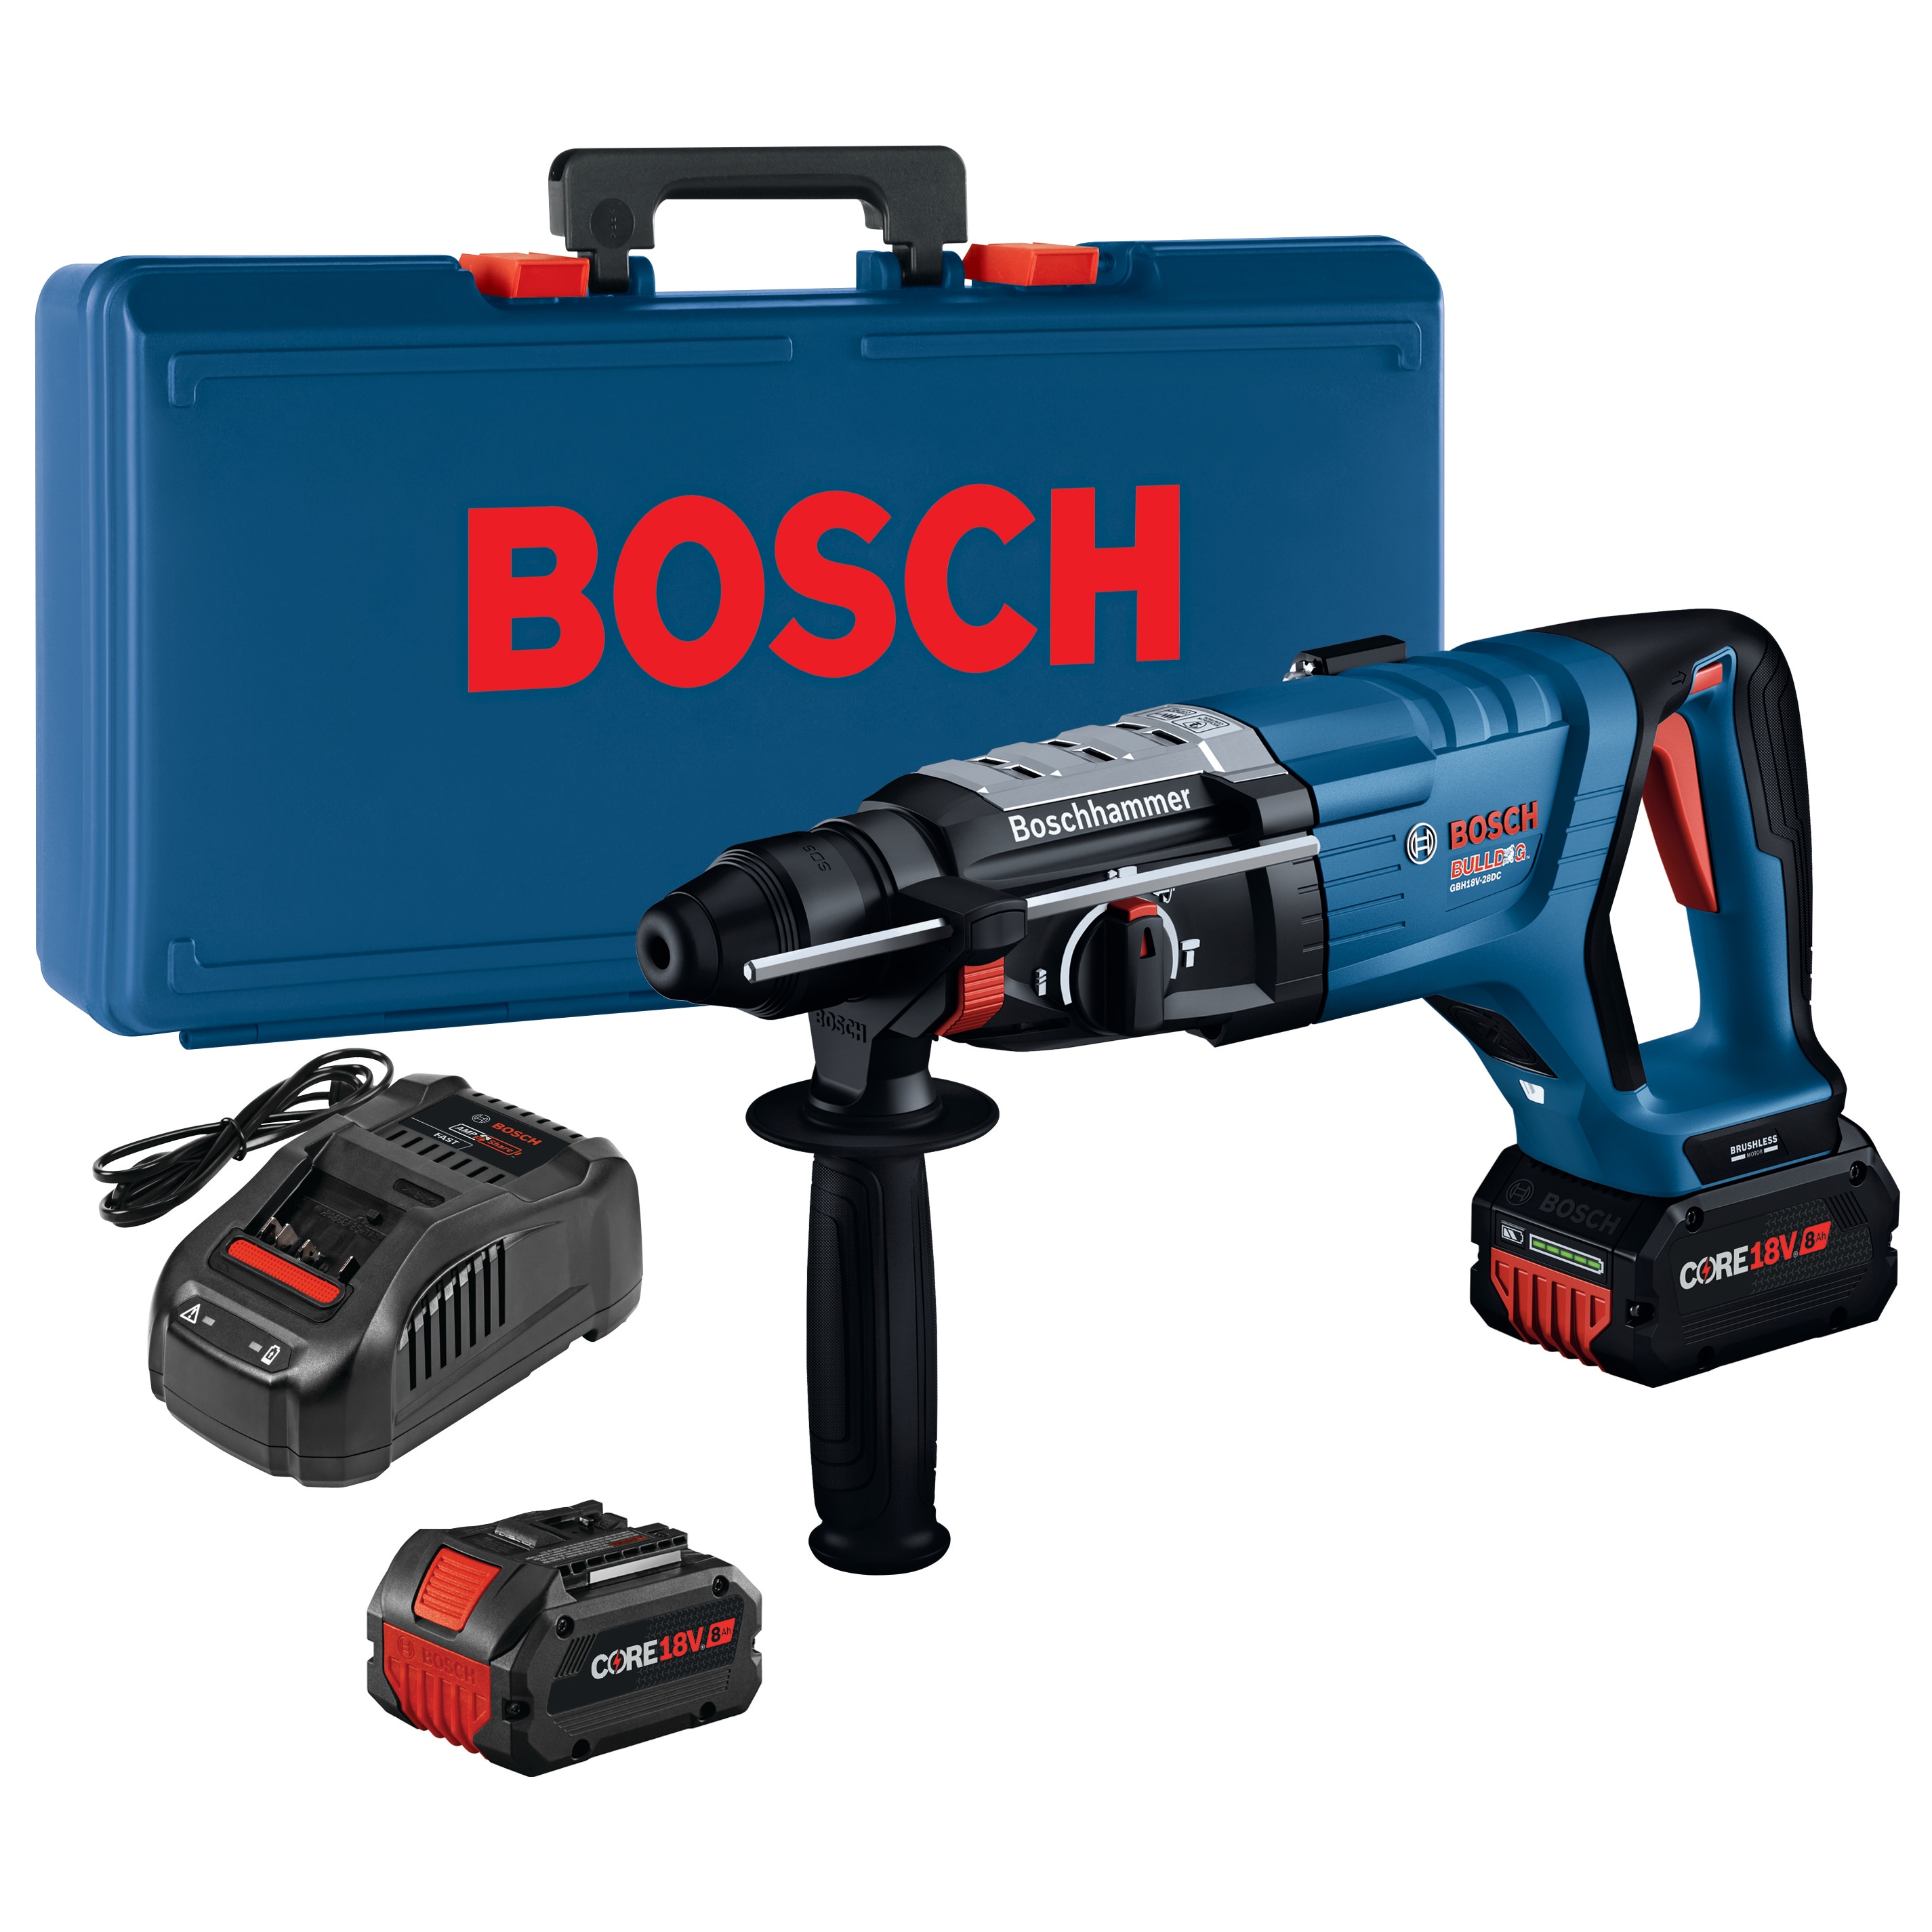 BOSCH GBH18V-34CQB24 PROFACTOR 18V Connected-Ready SDS-plus(R) Bulldog(TM)  1-1/4 In. Rotary Hammer with (2) CORE18V 8.0 Ah PROFACTOR Perform 電動工具 